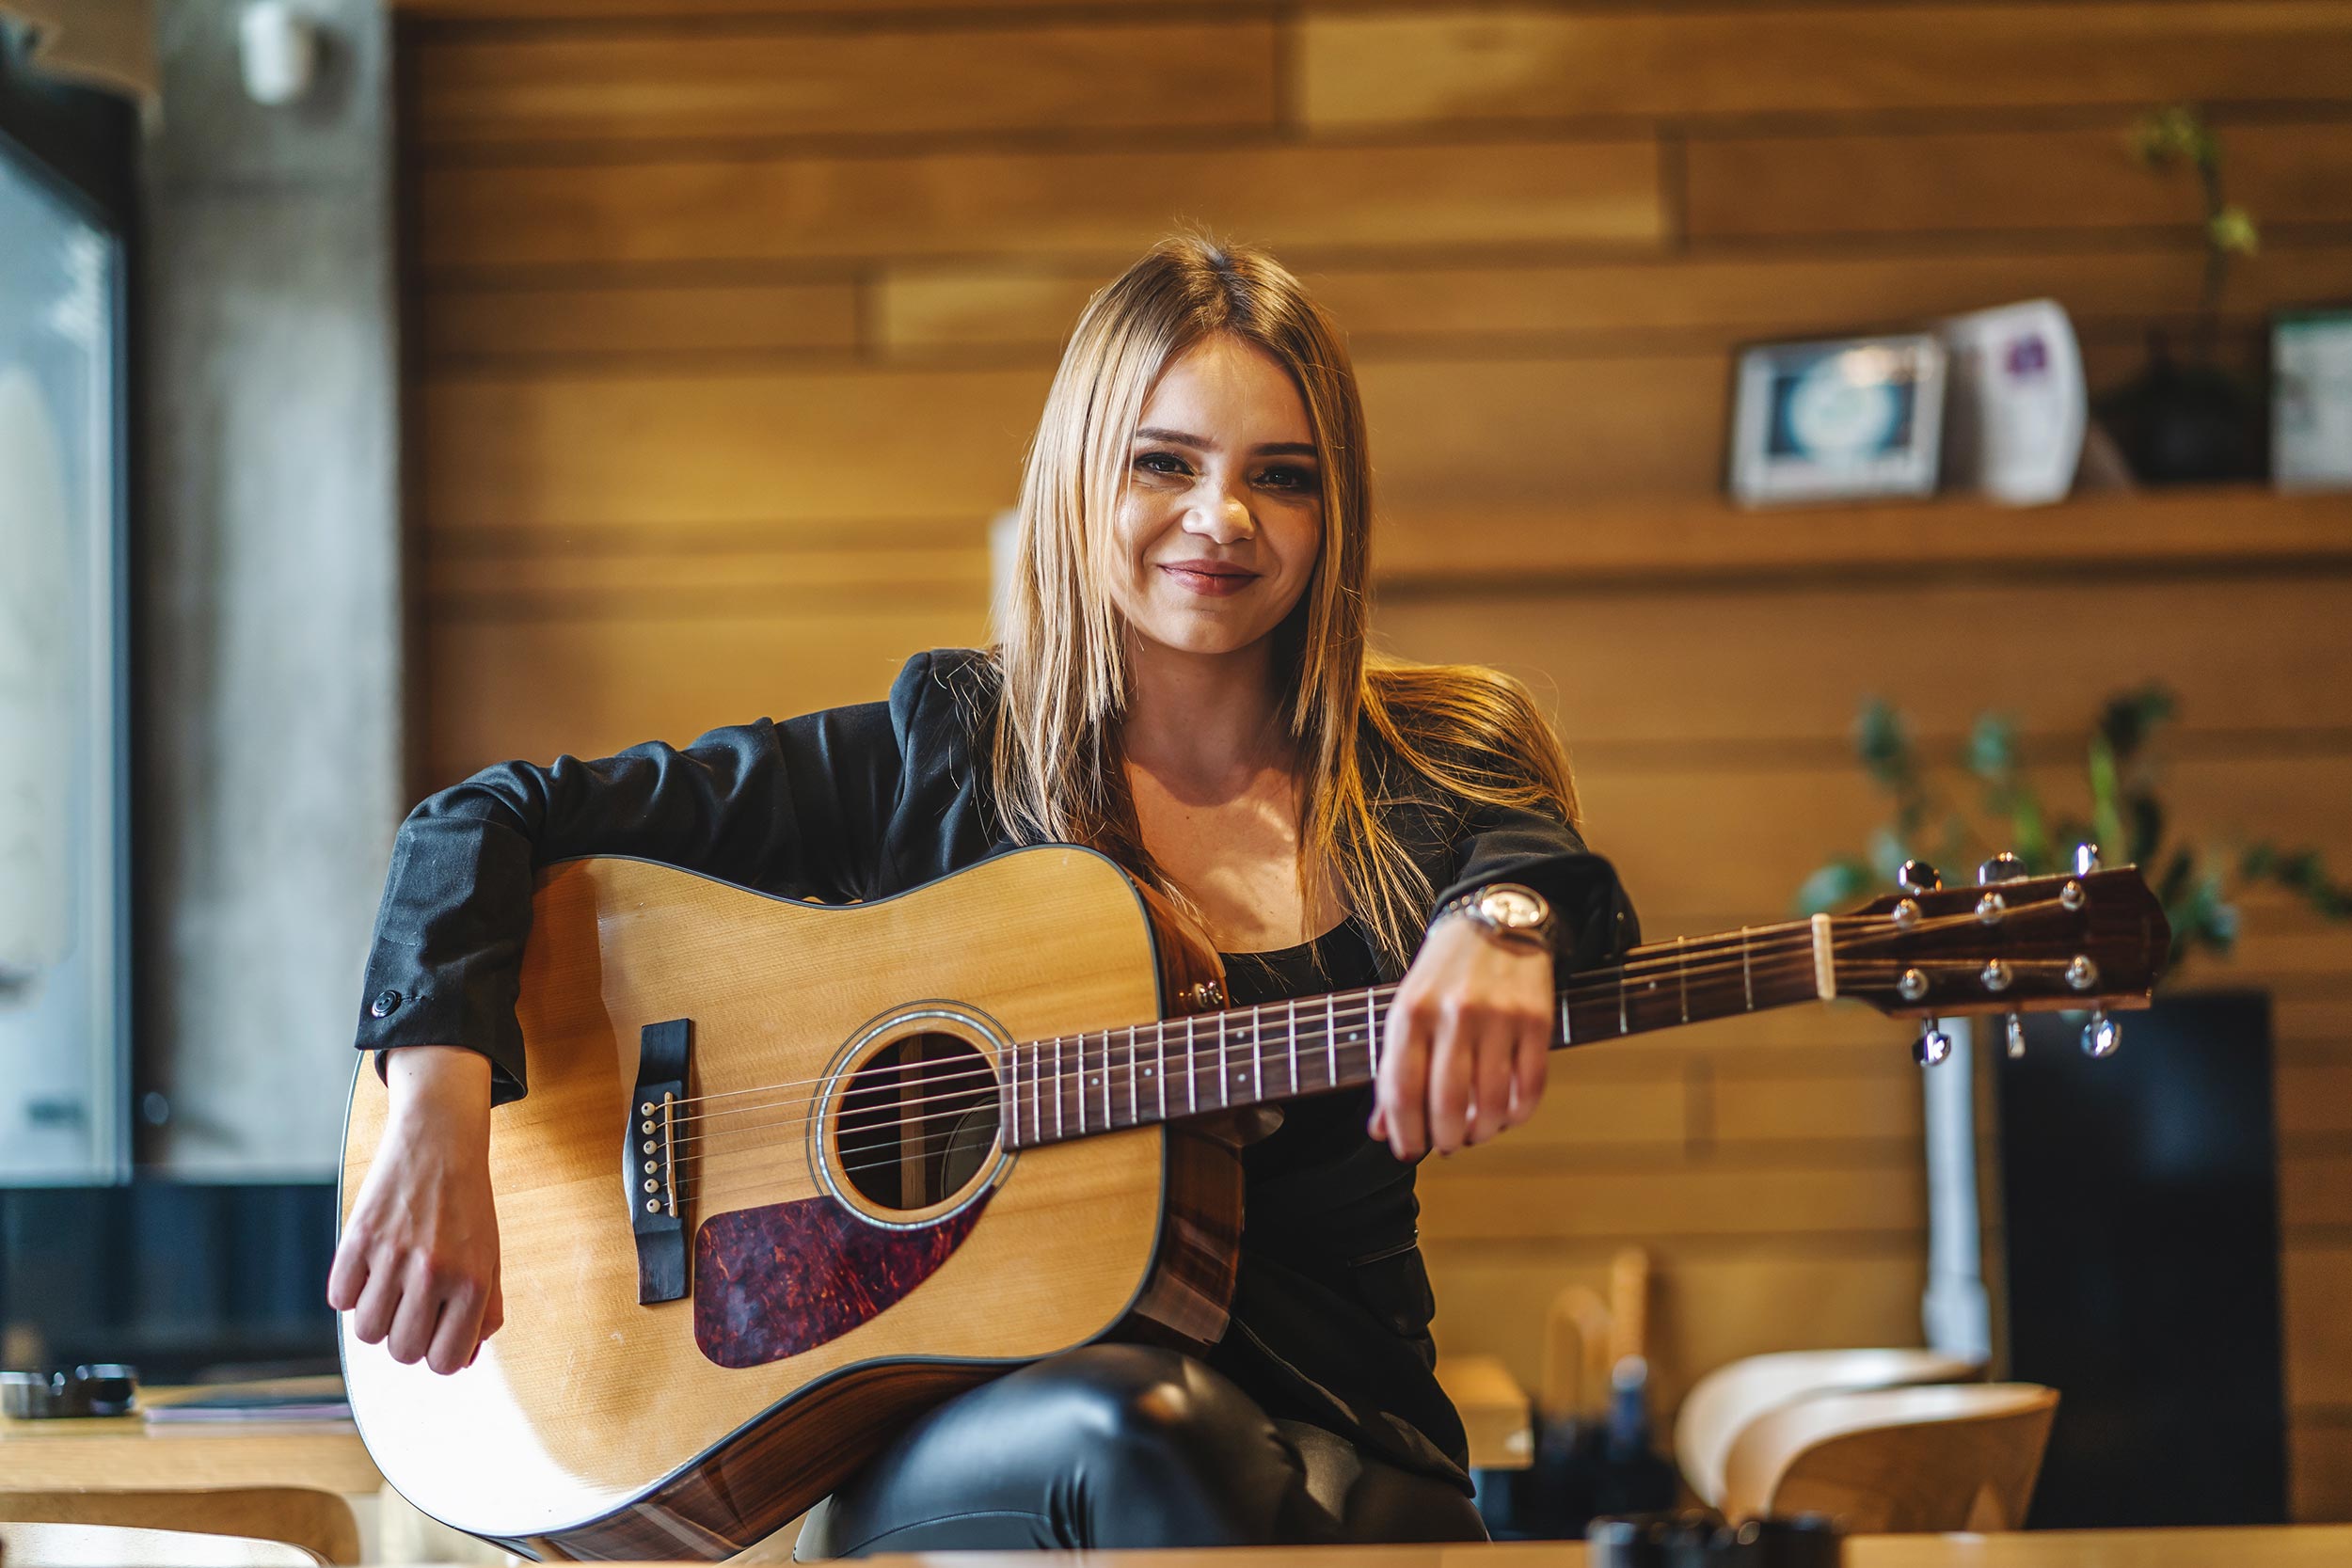 A women holding on a well kept acoustic guitar